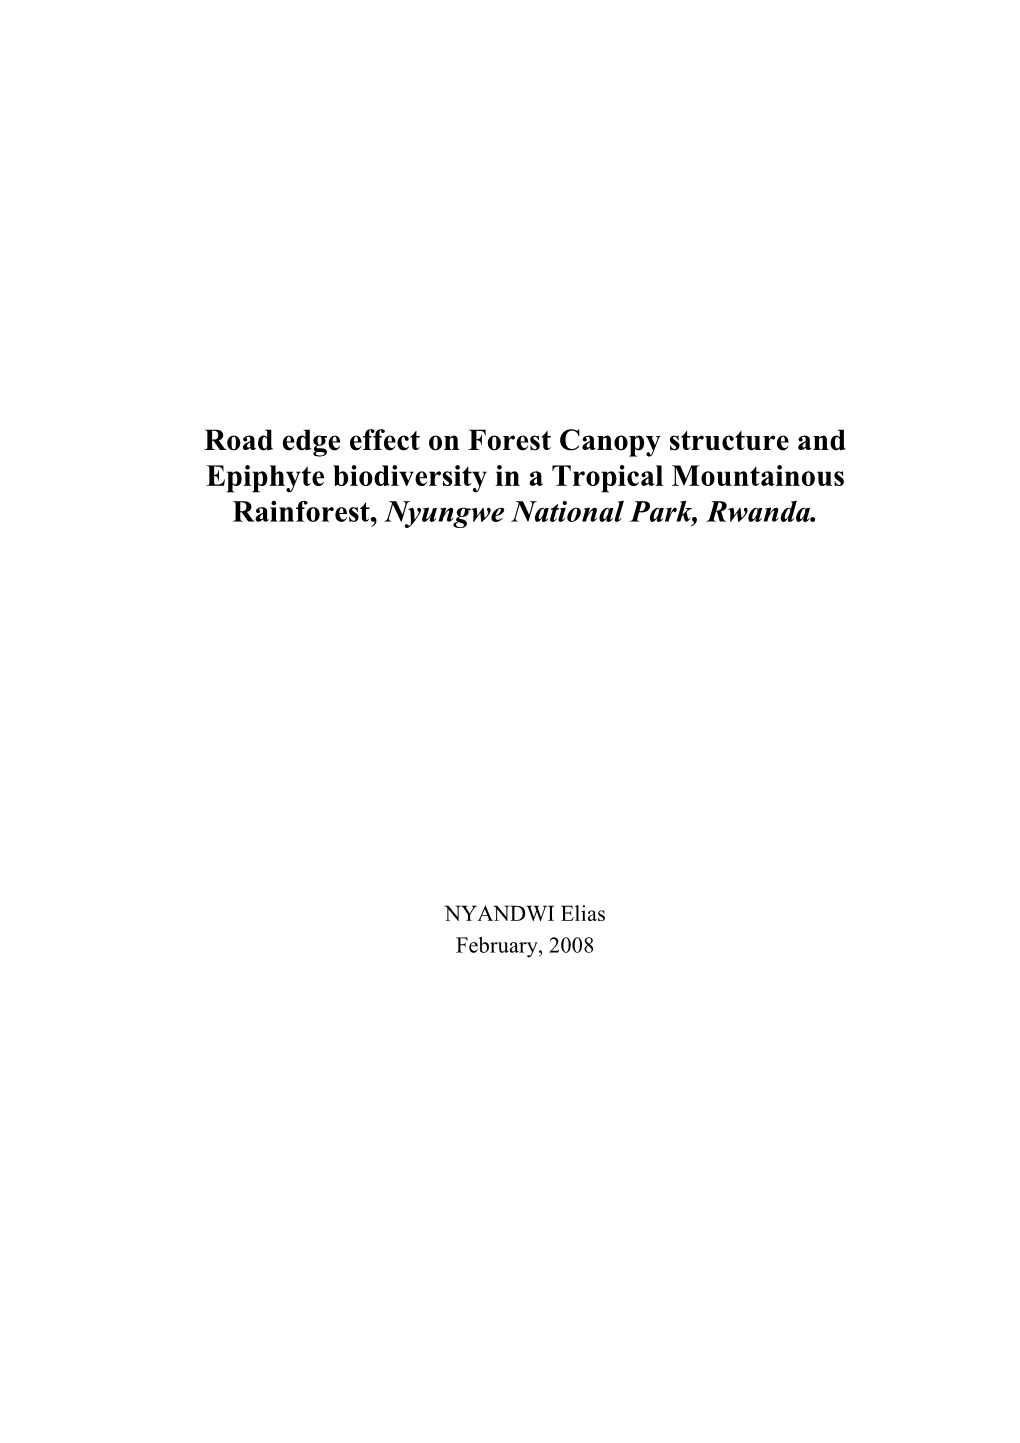 Road Edge Effect on Forest Canopy Structure and Epiphyte Biodiversity in a Tropical Mountainous Rainforest, Nyungwe National Park, Rwanda